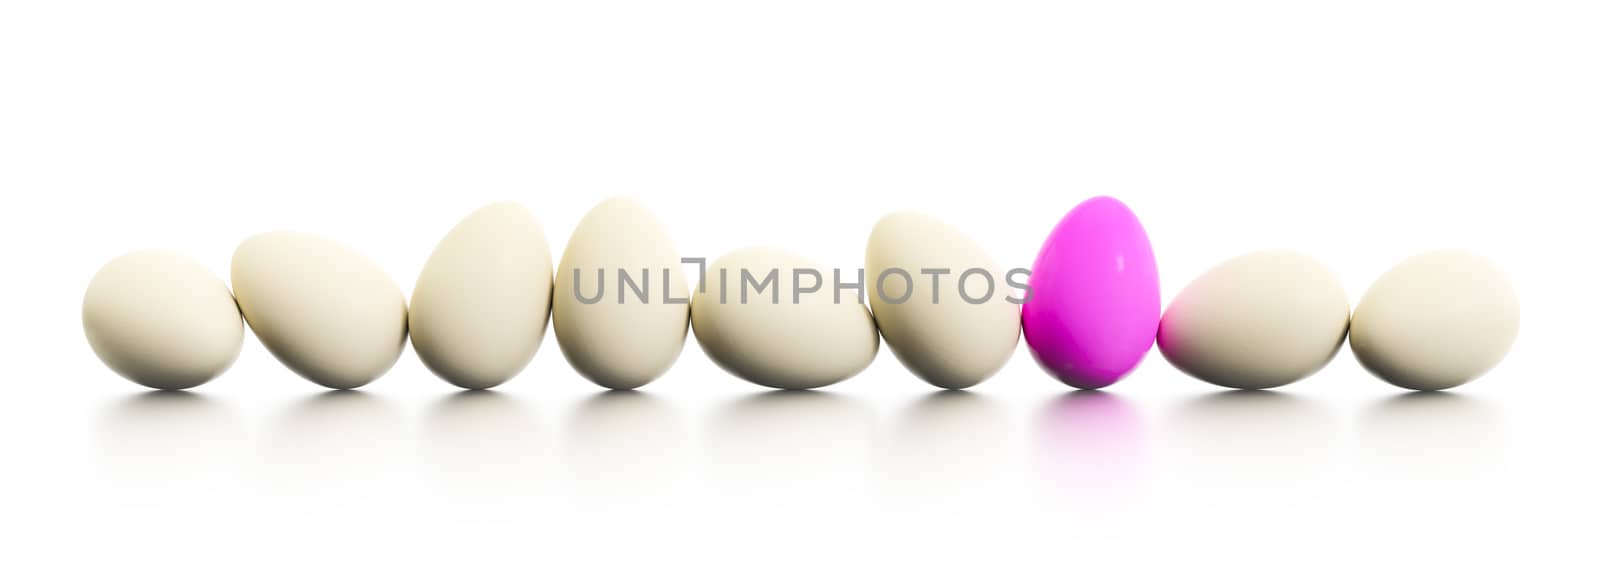 3d illustration of a row of easter eggs one dyed in pink